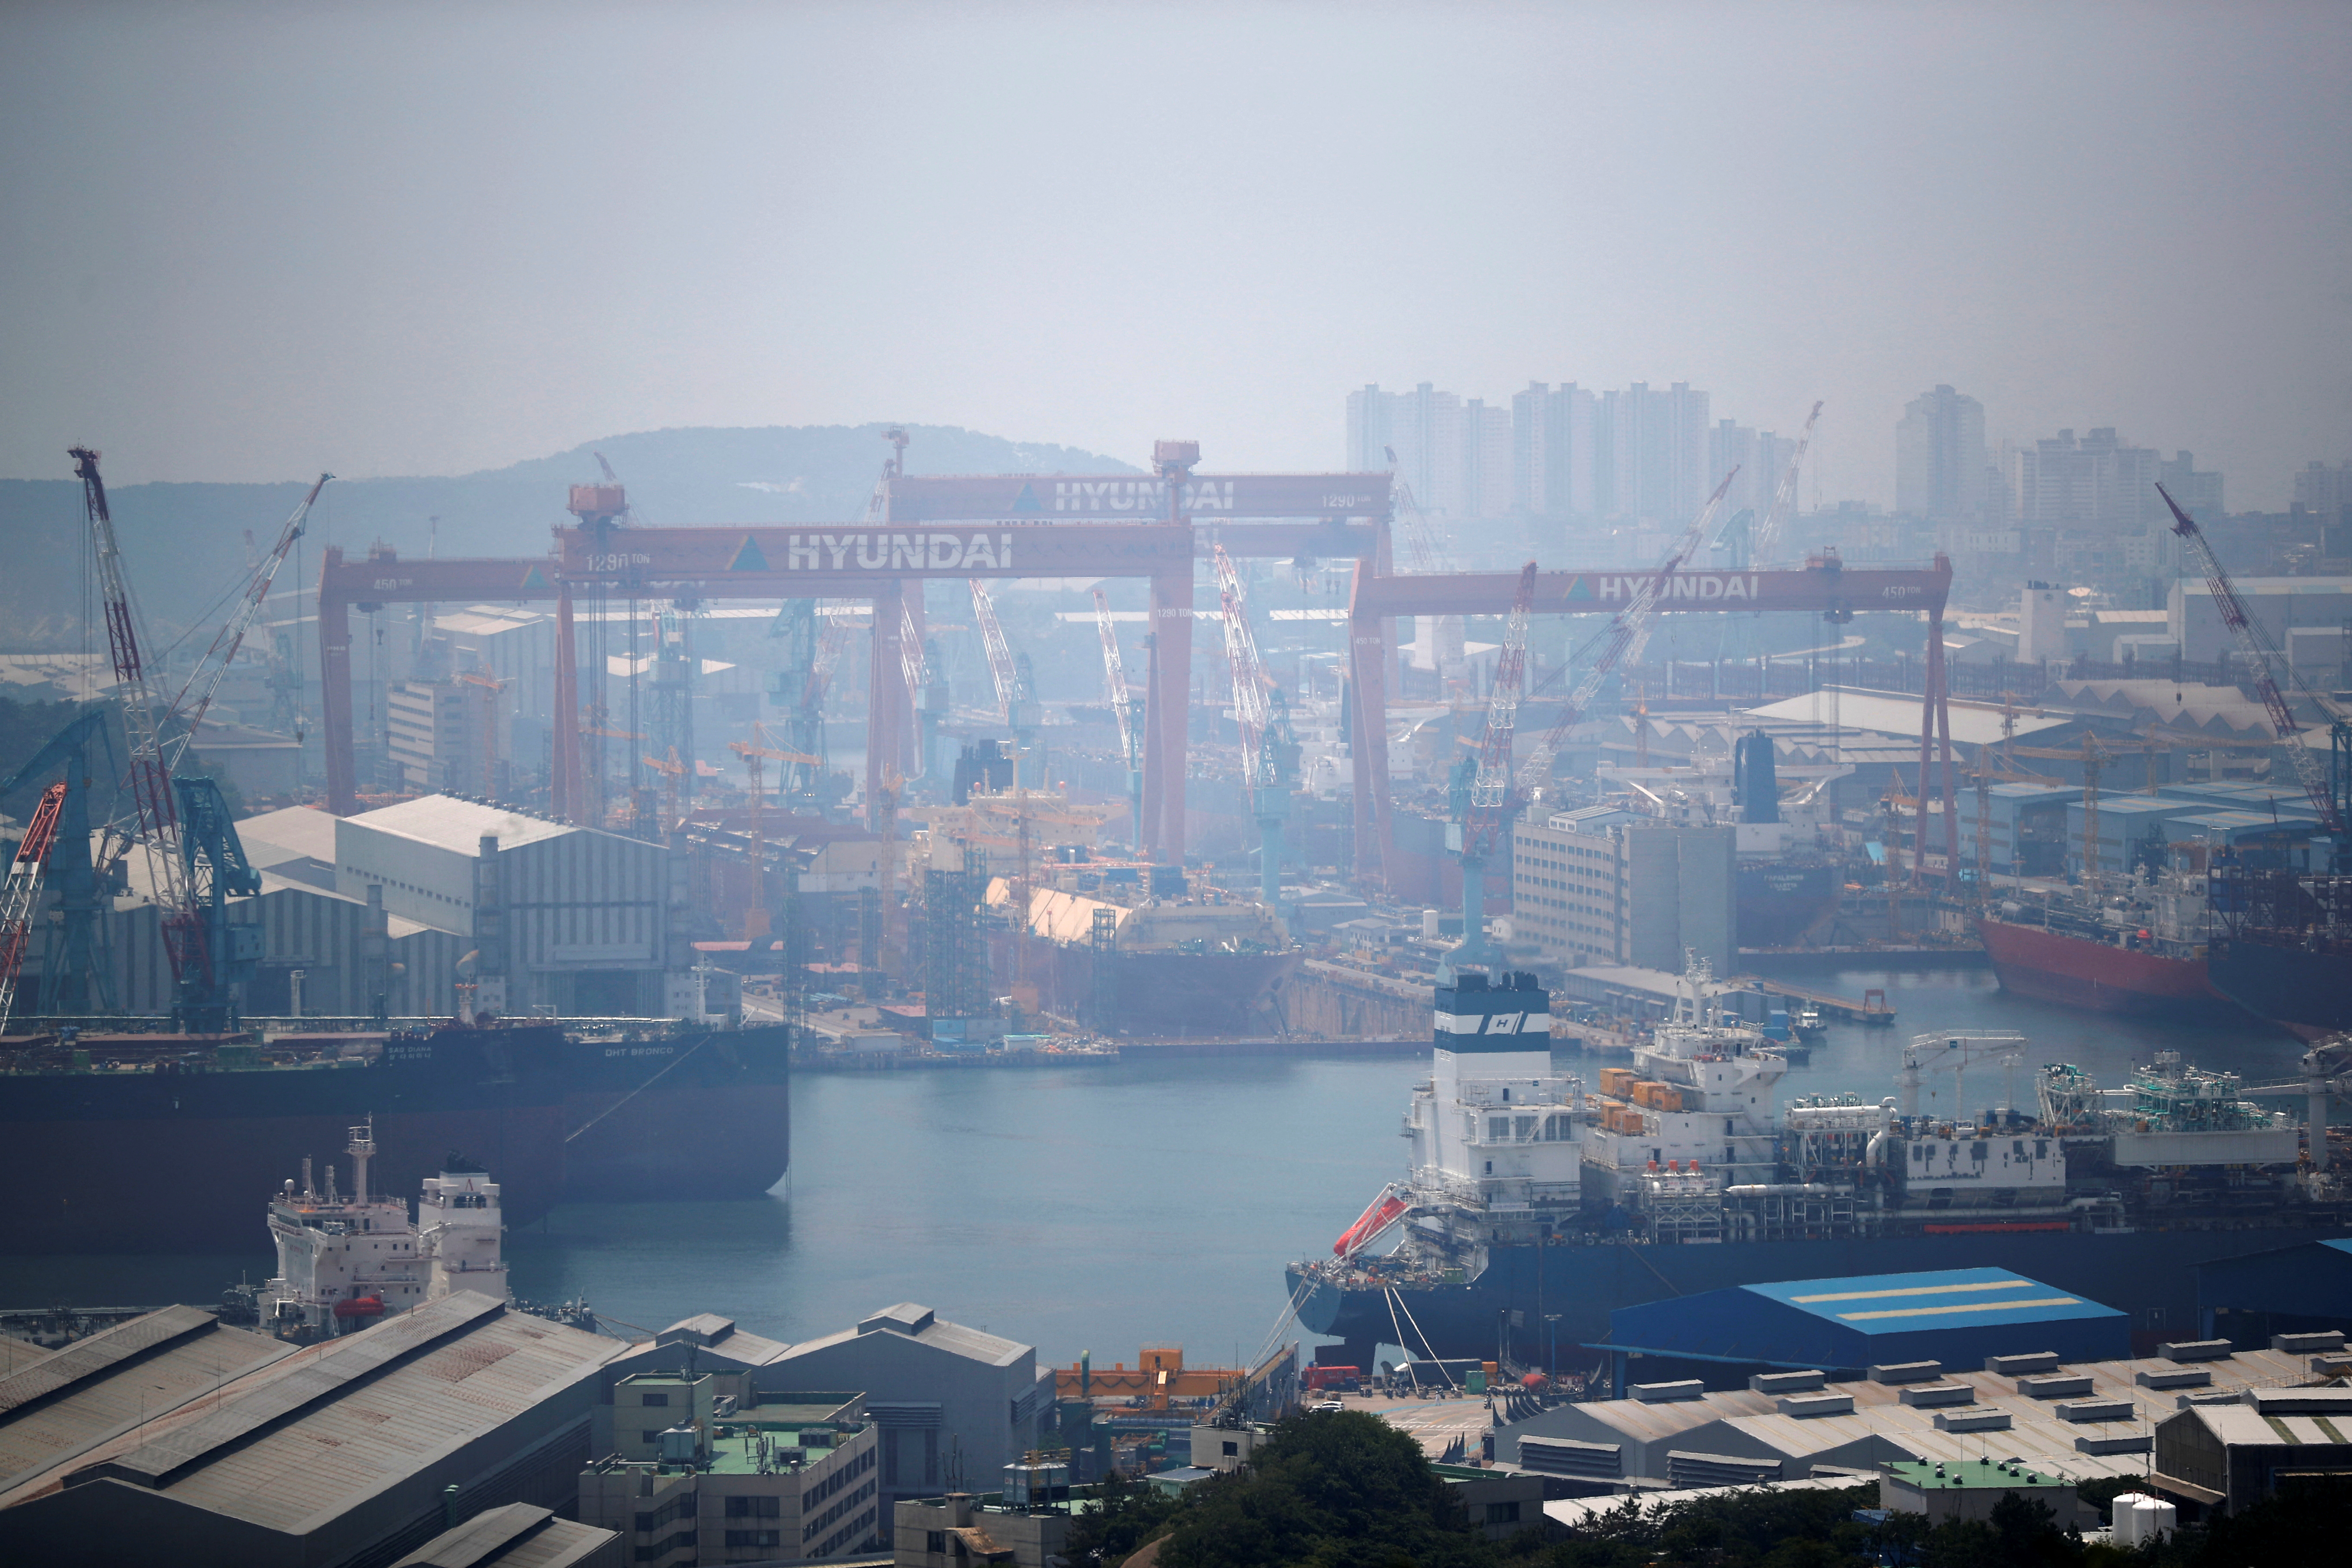 Giant cranes of Hyundai Heavy Industries are seen in Ulsan